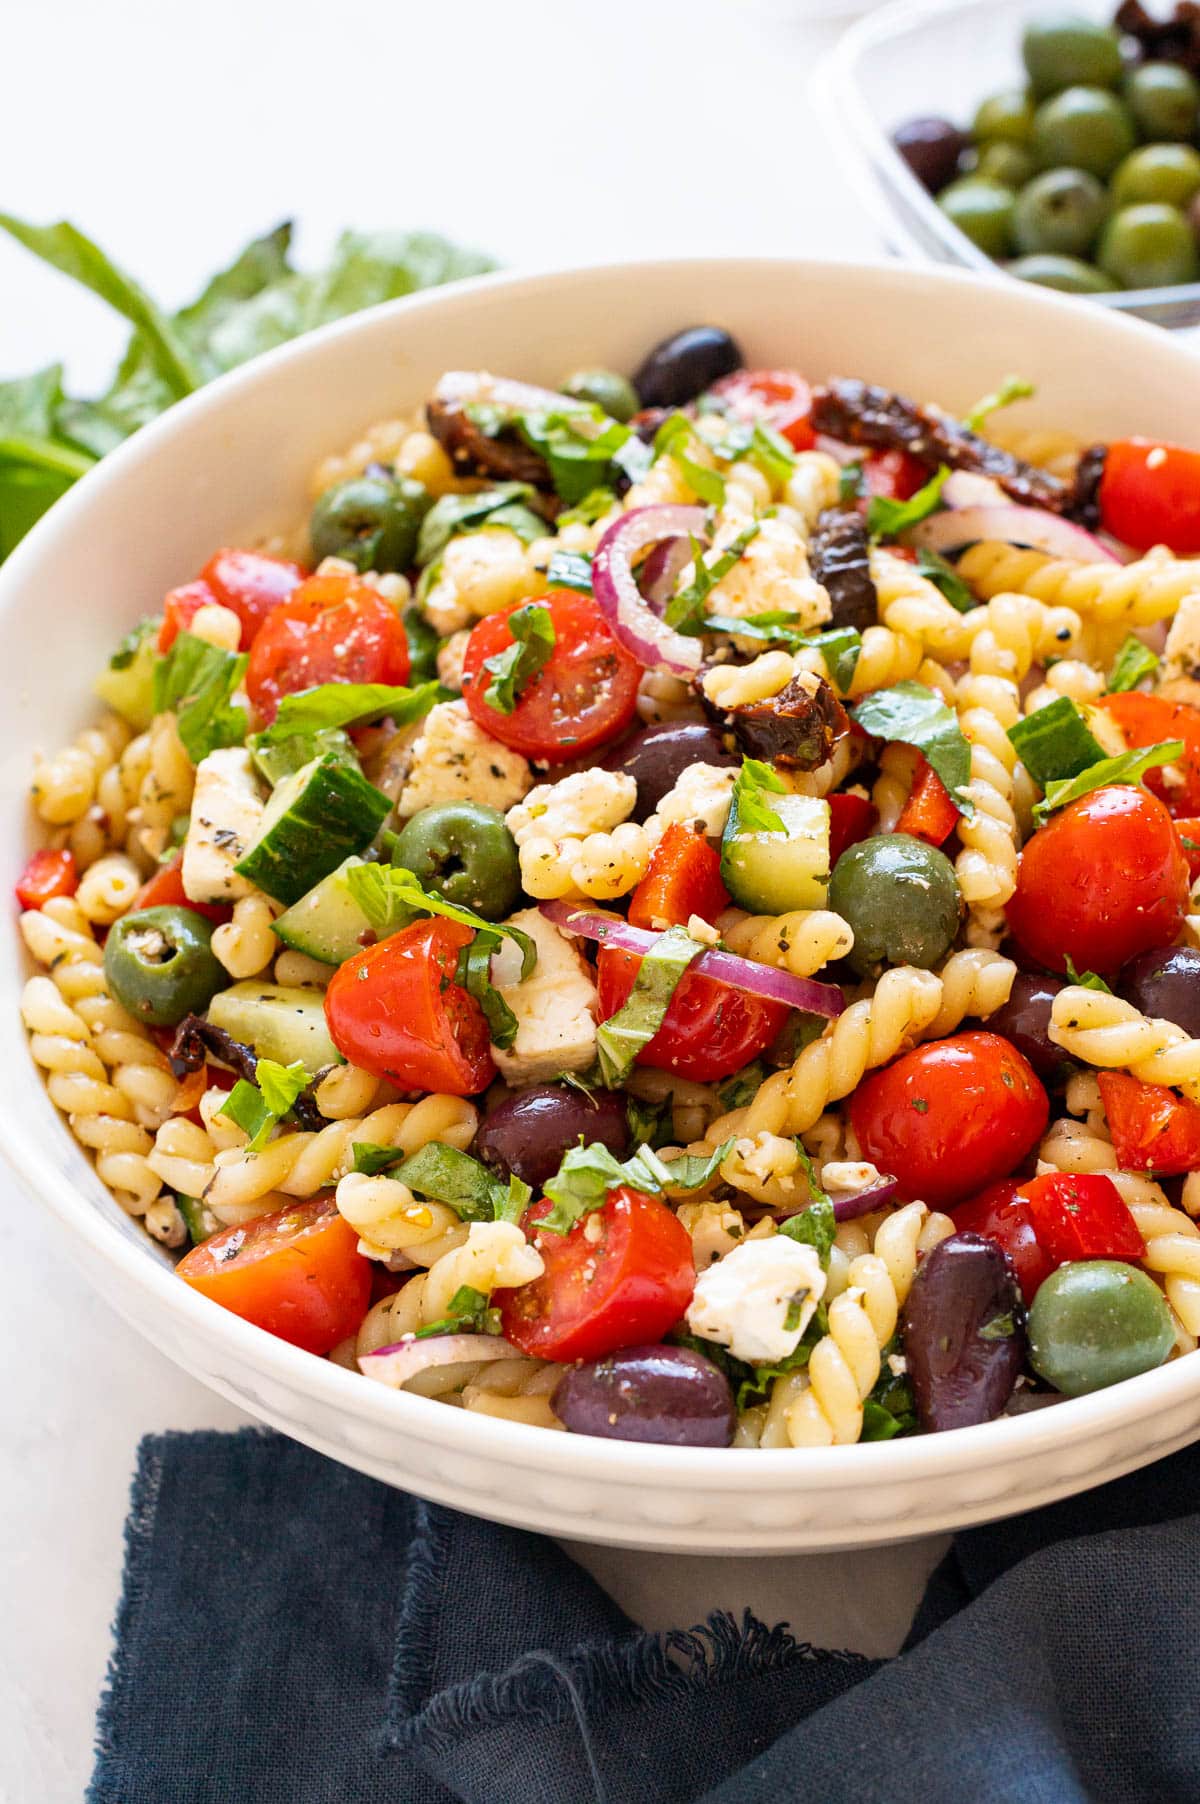 Mediterranean pasta salad with olives, cucumbers, tomatoes and feta cheese in white bowl.